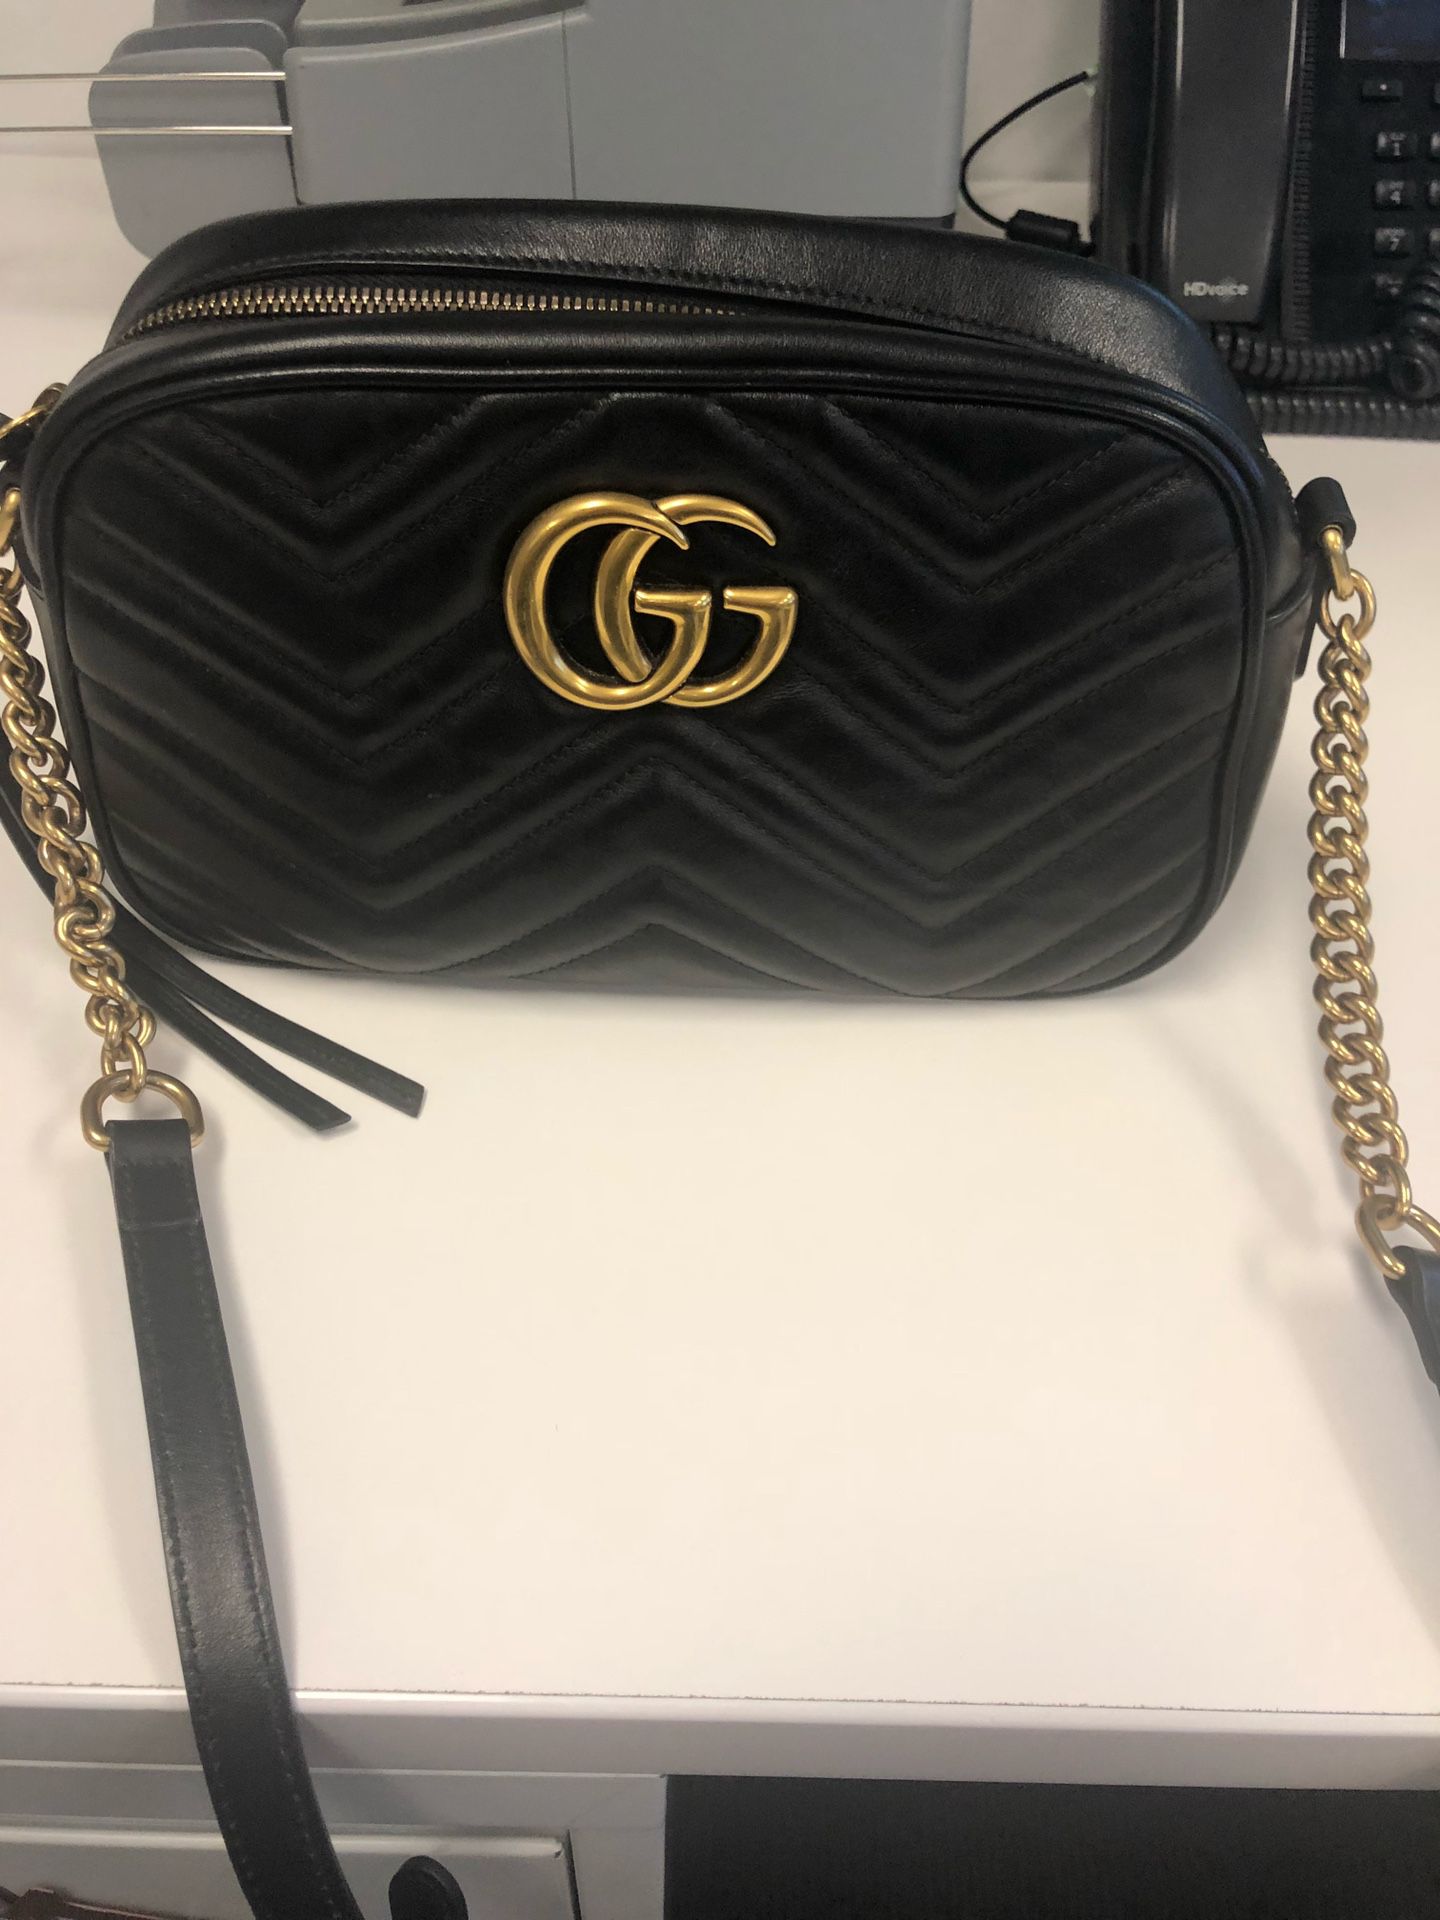 Real authentic Gucci crossbody